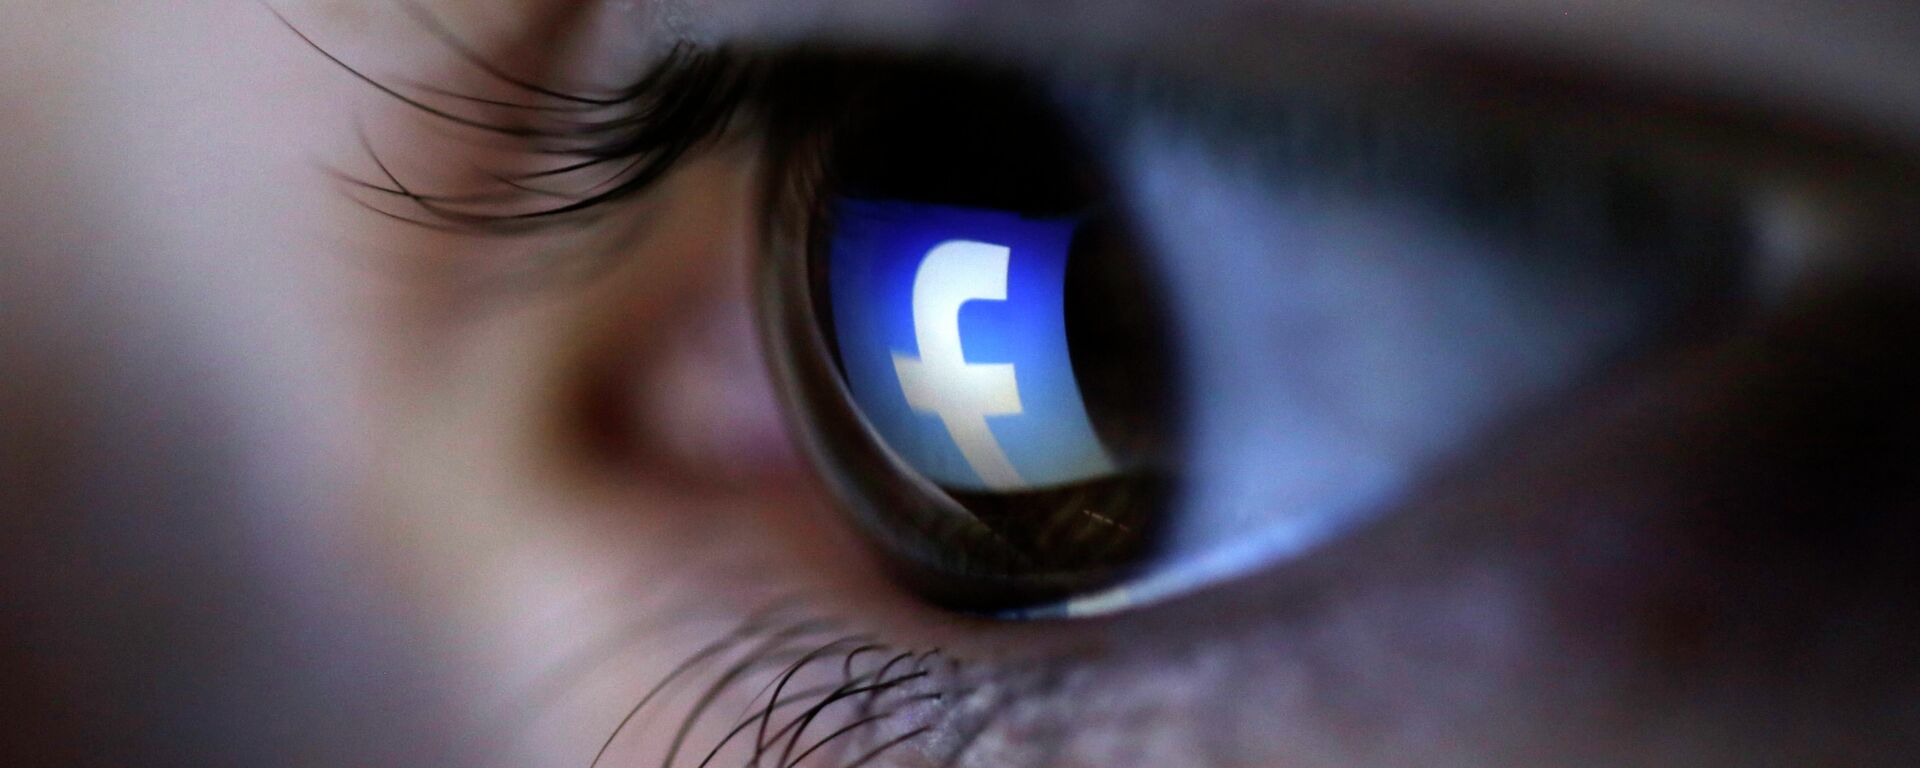 A picture illustration shows a Facebook logo reflected in a person's eye, in Zenica, March 13, 2015 - Sputnik Mundo, 1920, 05.04.2021